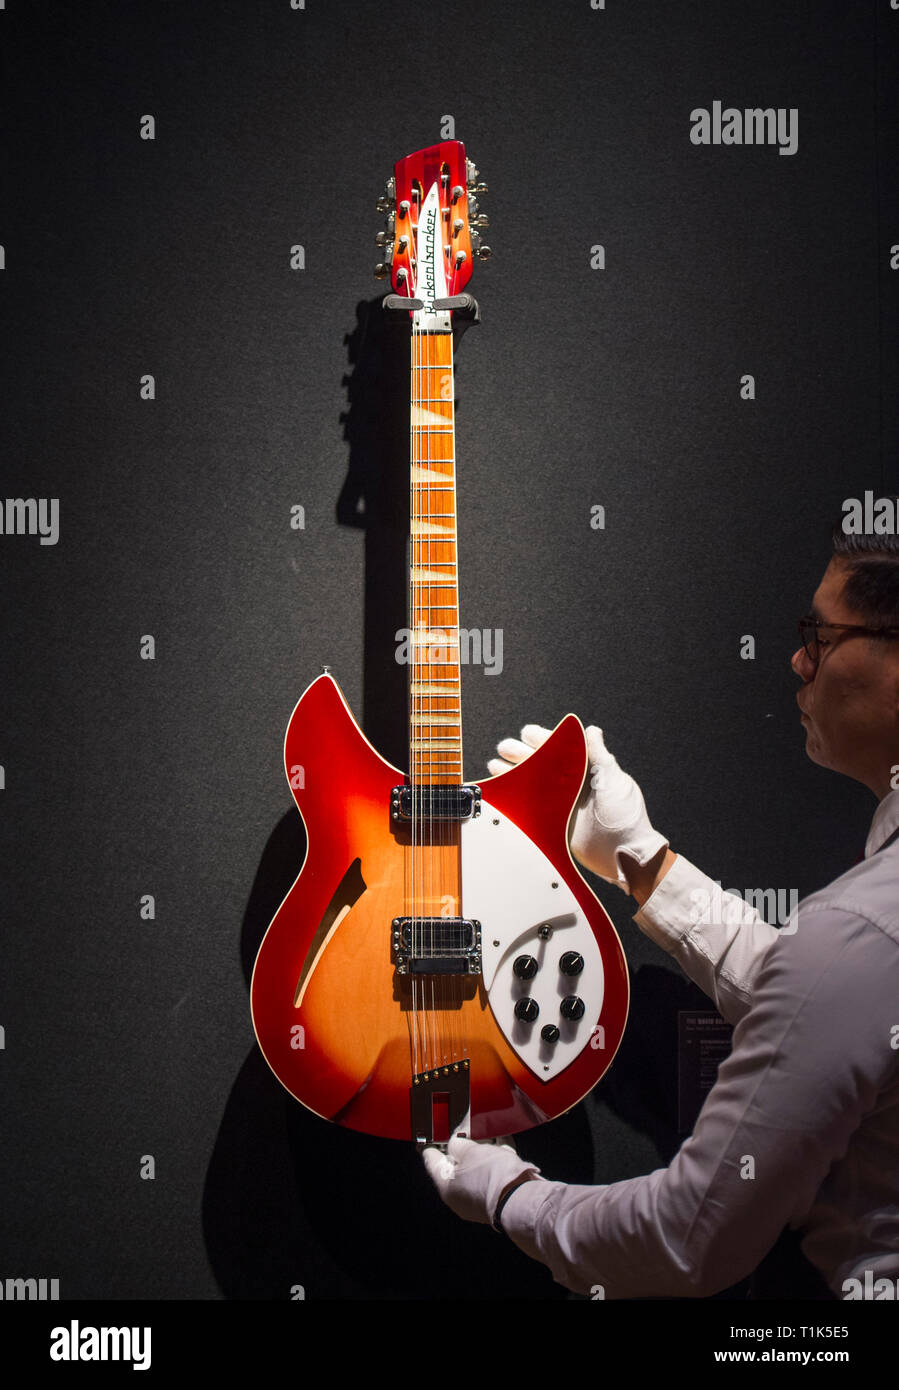 Christies, King Street, London, UK. 27 March, 2019. Christie’s unveil the much-anticipated preview of the personal guitar collection of rock’n’roll legend David Gilmour, guitarist, singer and songwriter of Pink Floyd. The first stop for the pre-sale touring exhibition, the 120+ guitar highlights are being sold, with proceeds to benefit charity. Image: Rickenbacker Incorporated, Santa Ana, 1991, semi-hollow body electric 12-string guitar. Estimate $2,000-3,000. Credit: Malcolm Park/Alamy Live News. Stock Photo